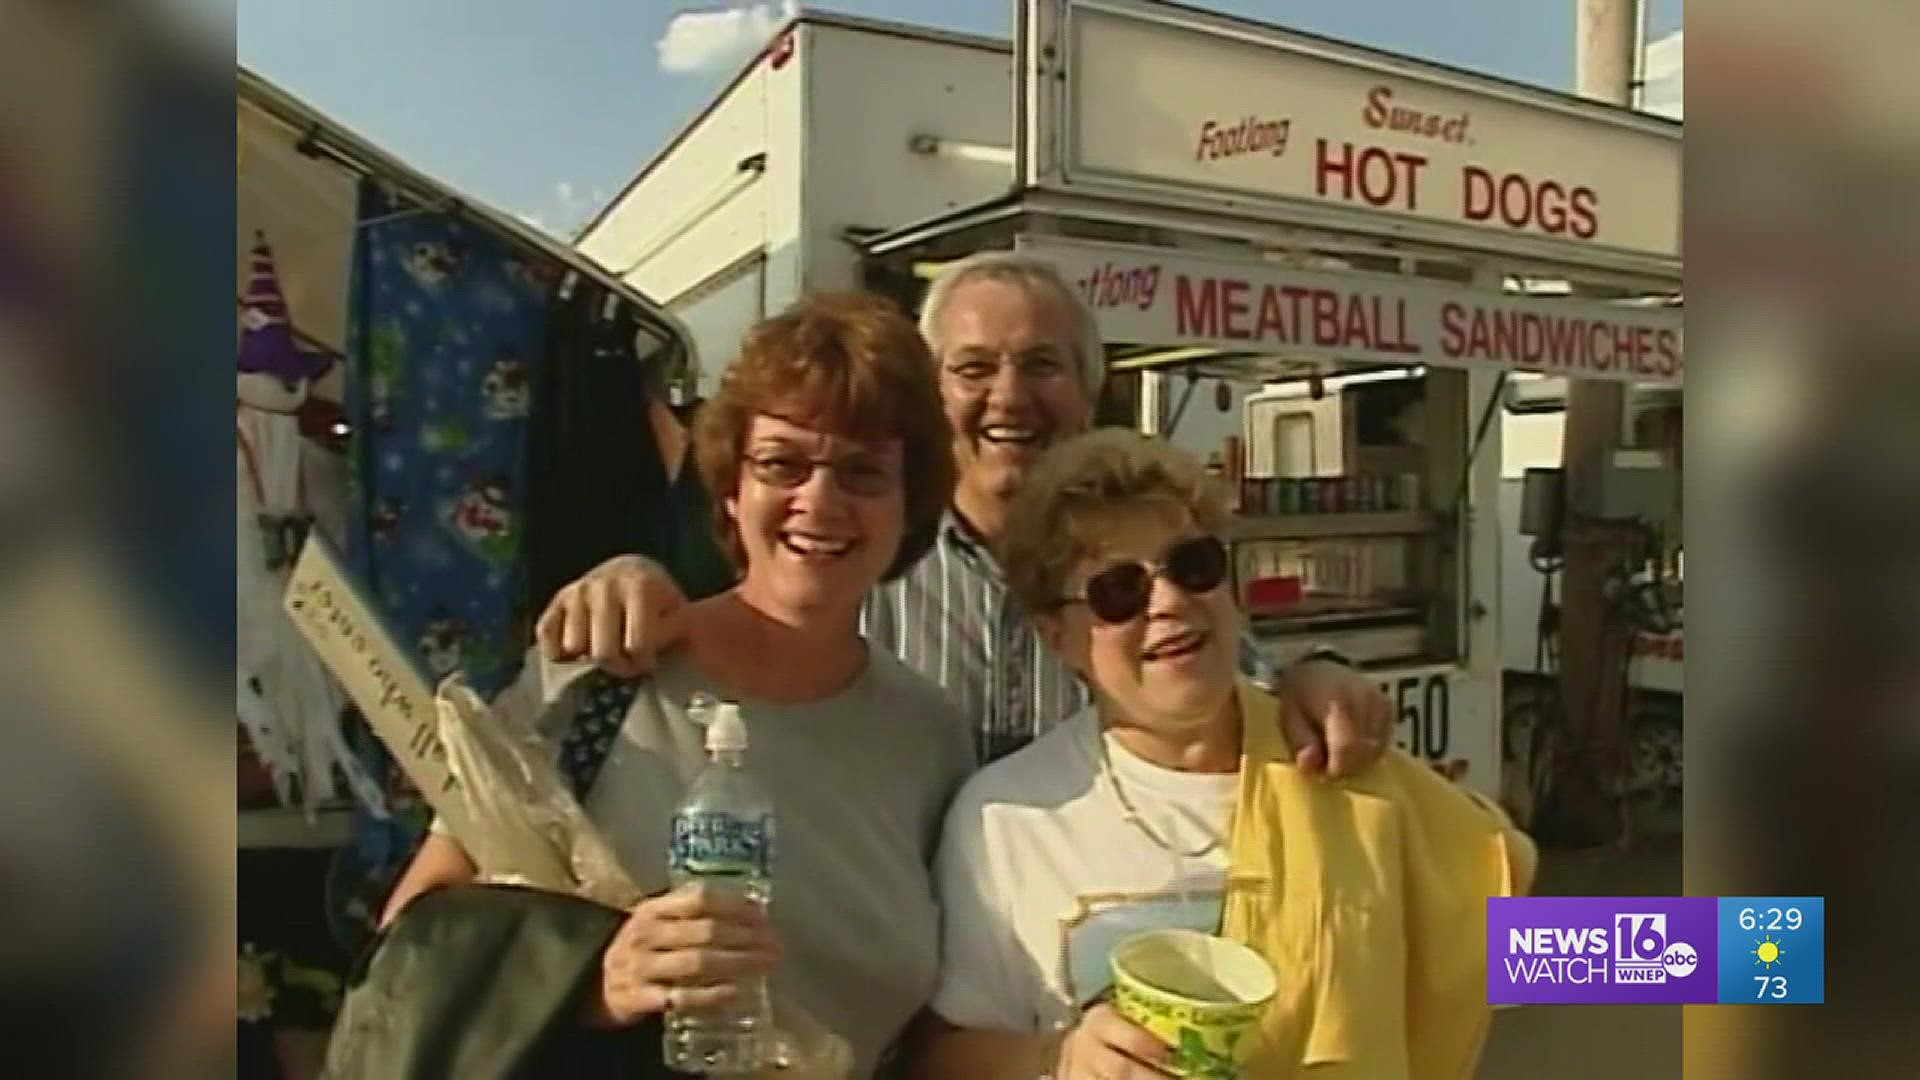 We take a walk down The Bloomsburg Fair with Mike Stevens 15 years ago.